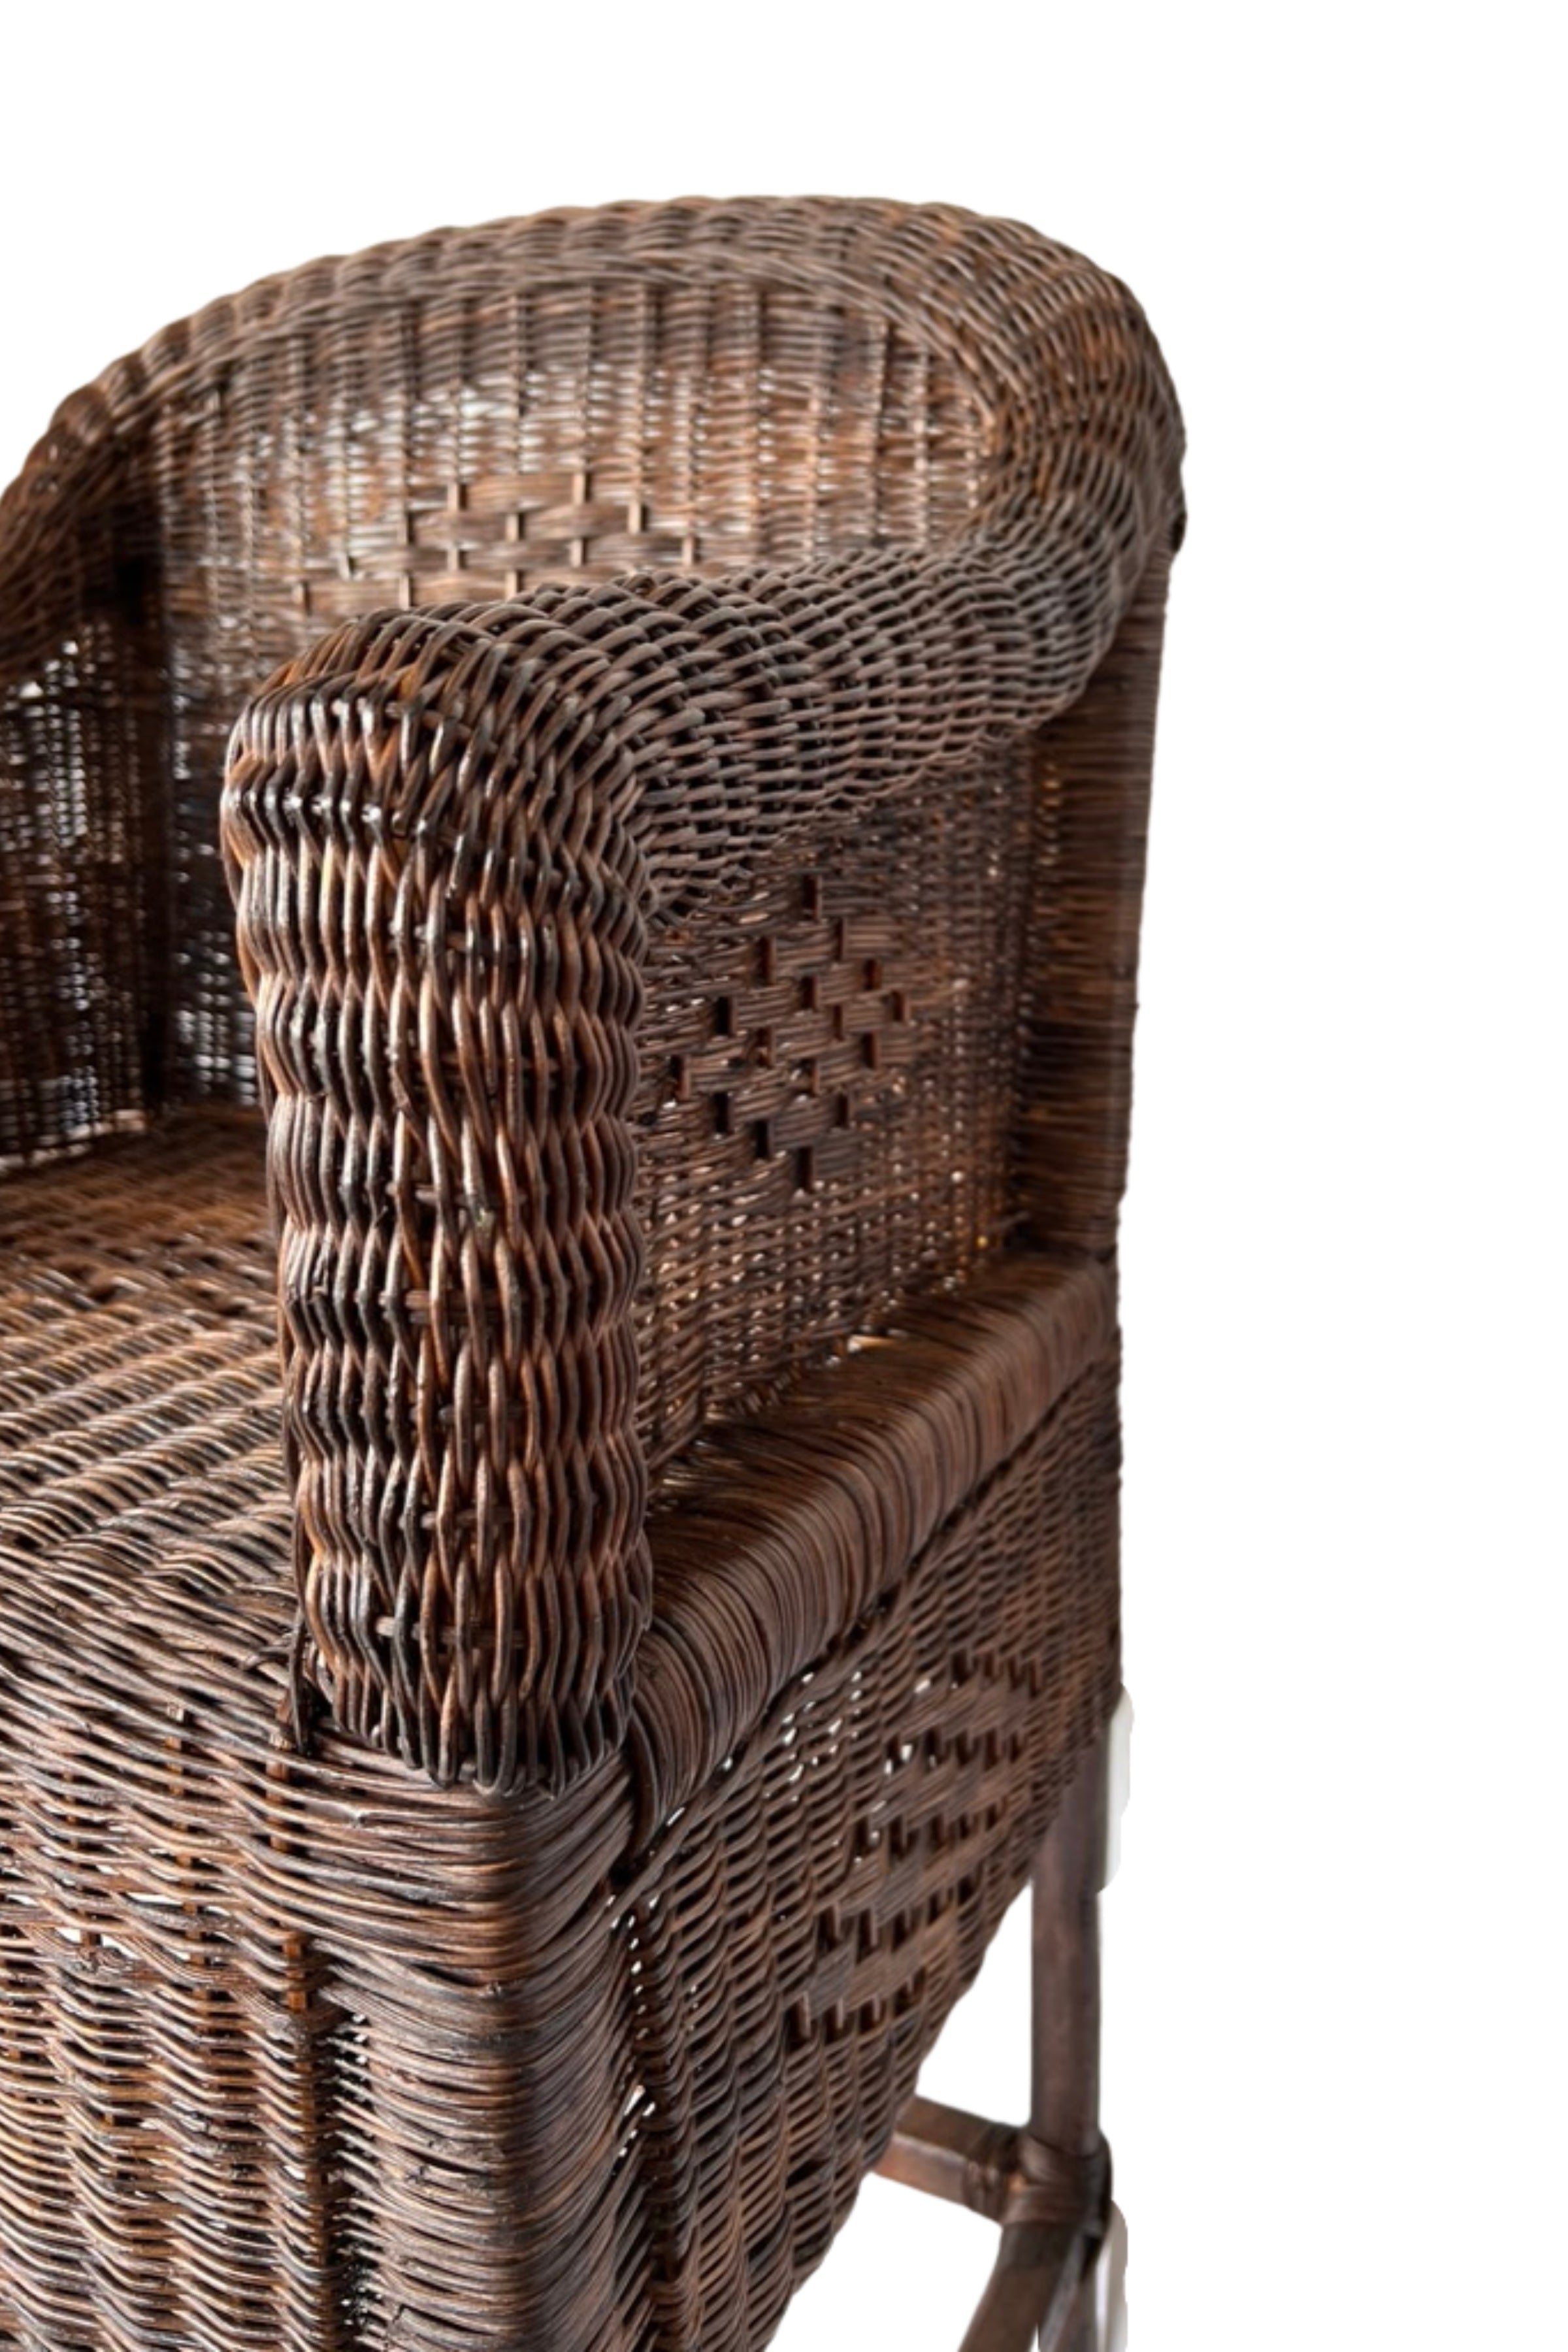 Classic Woven Cane Counter / Bar Stool